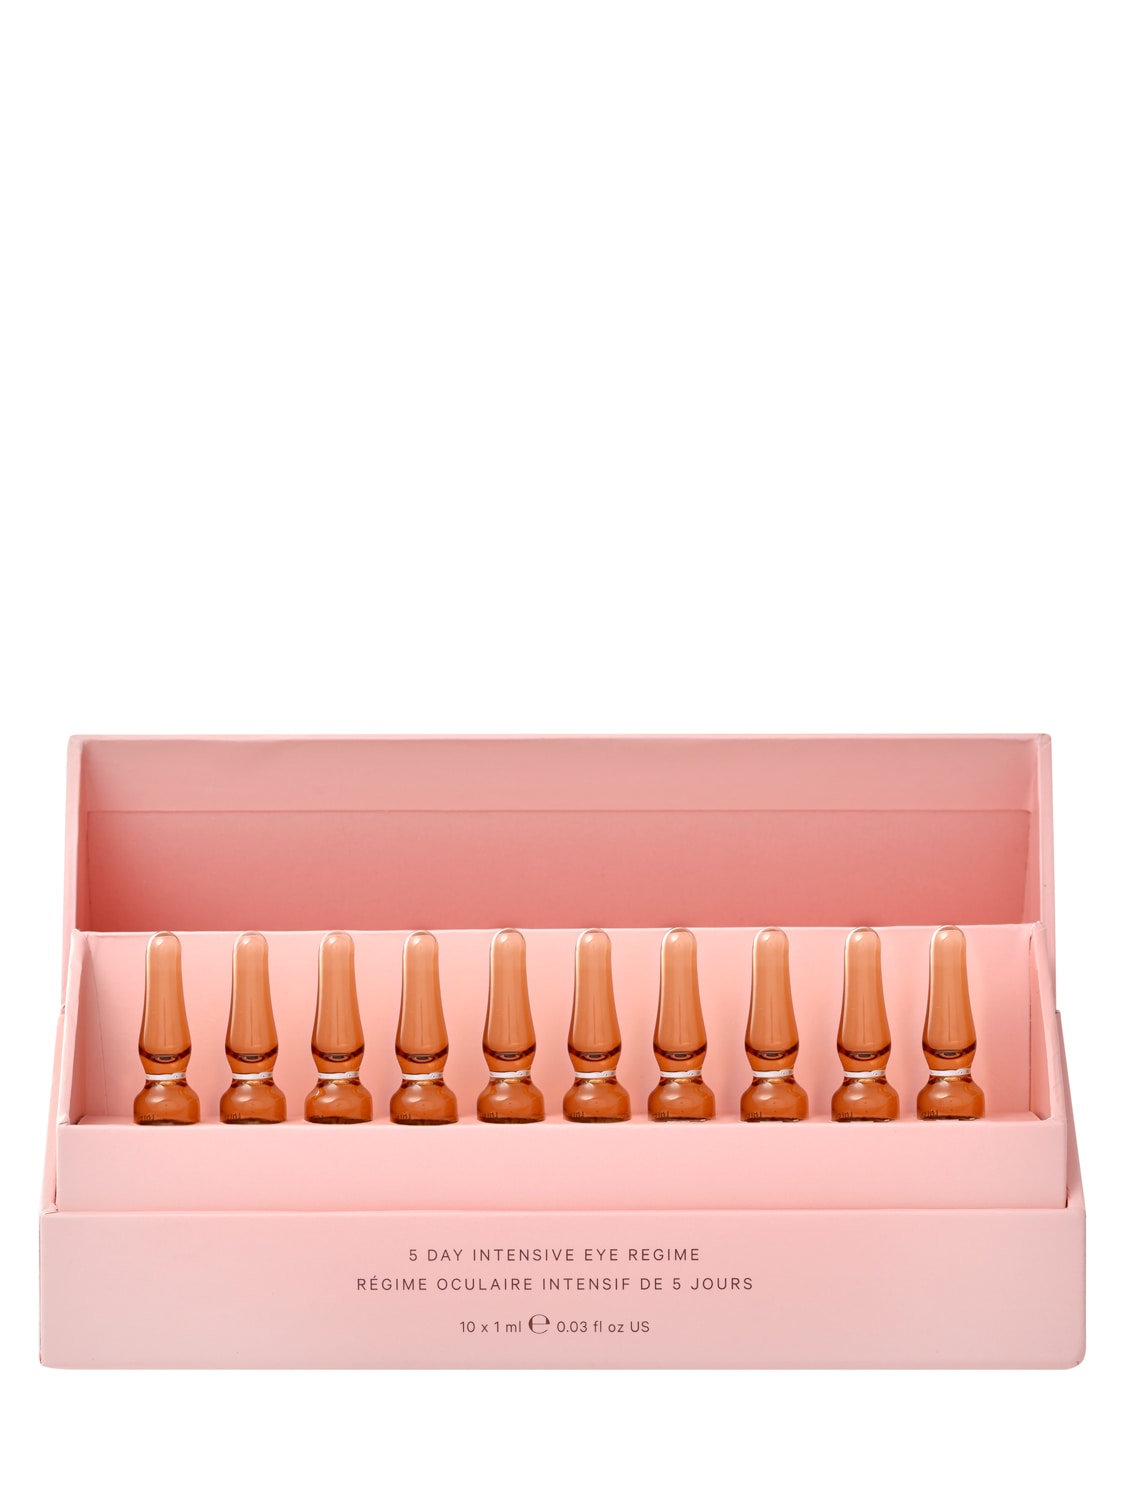 Image of Hydrating & Brightening Eye Ampoules